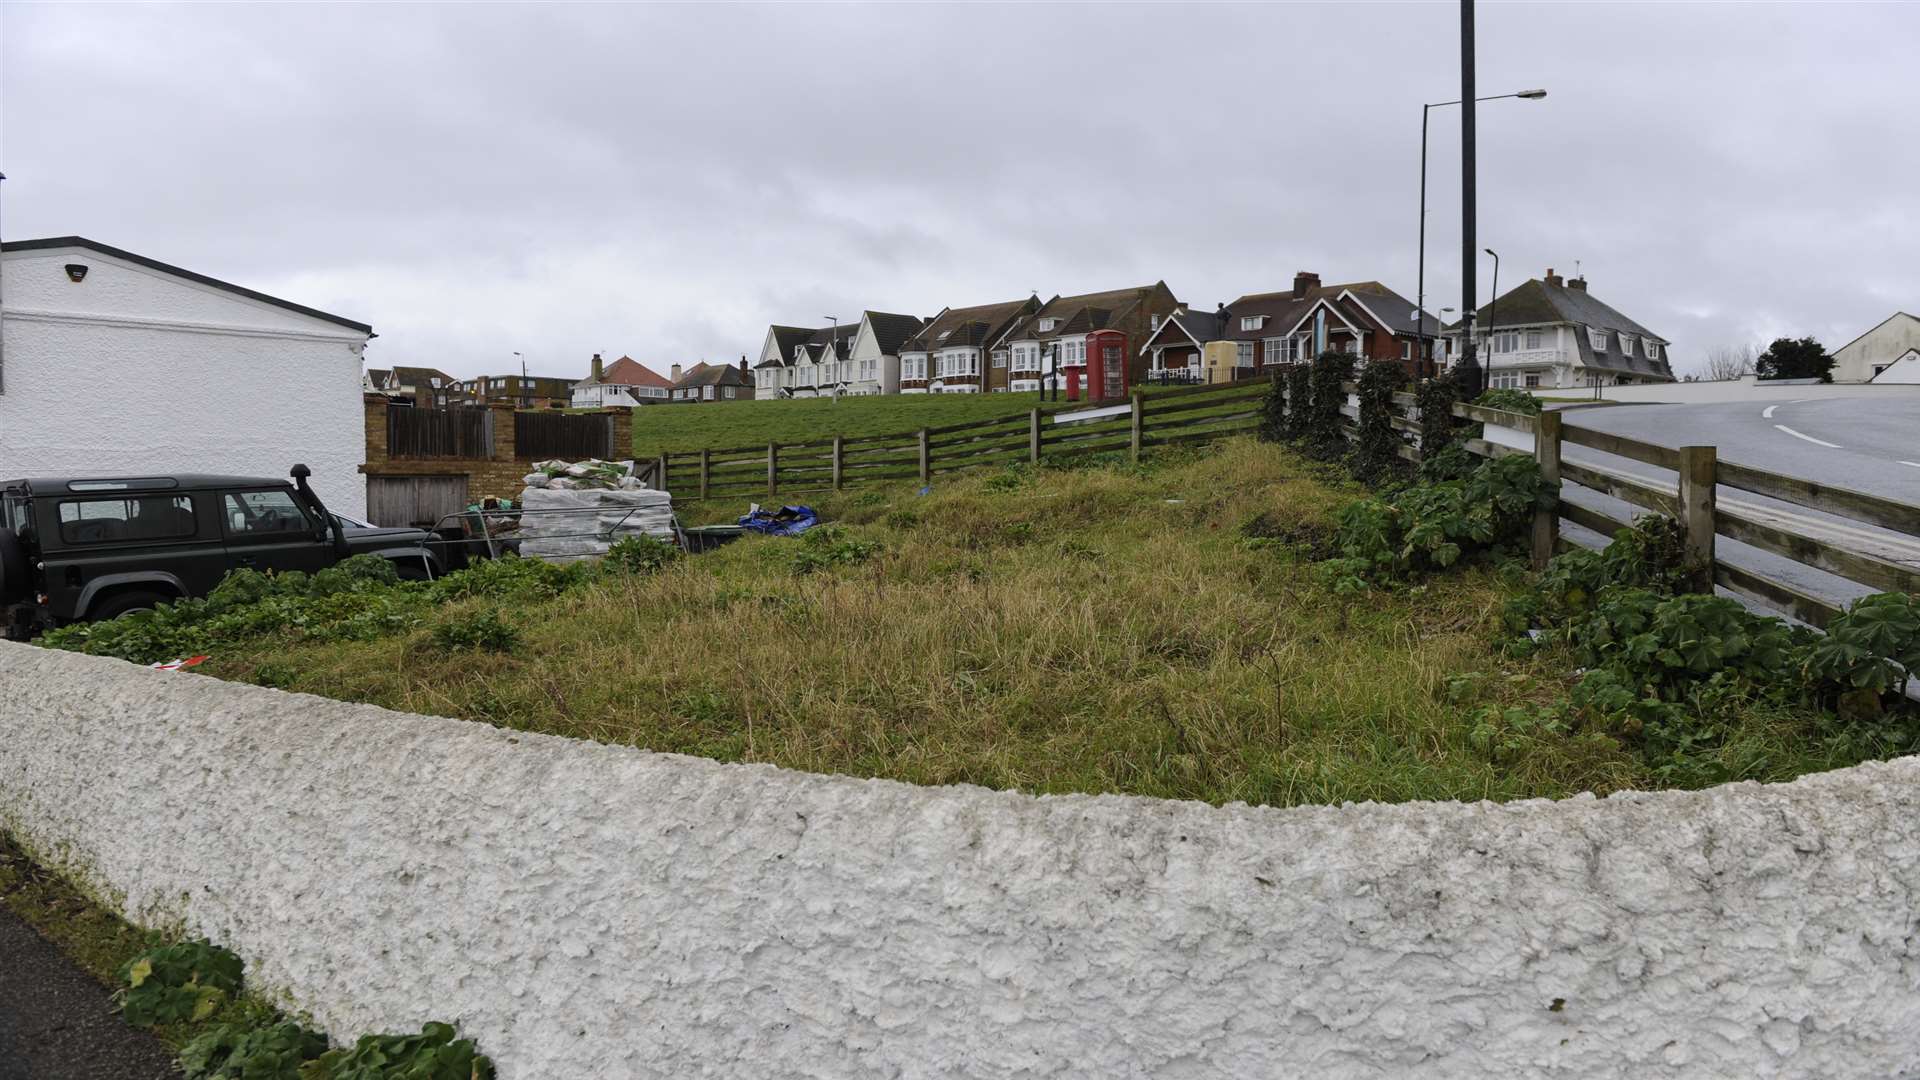 The detox and weight loss retreat will be built on vacant land in East Cliff Parade